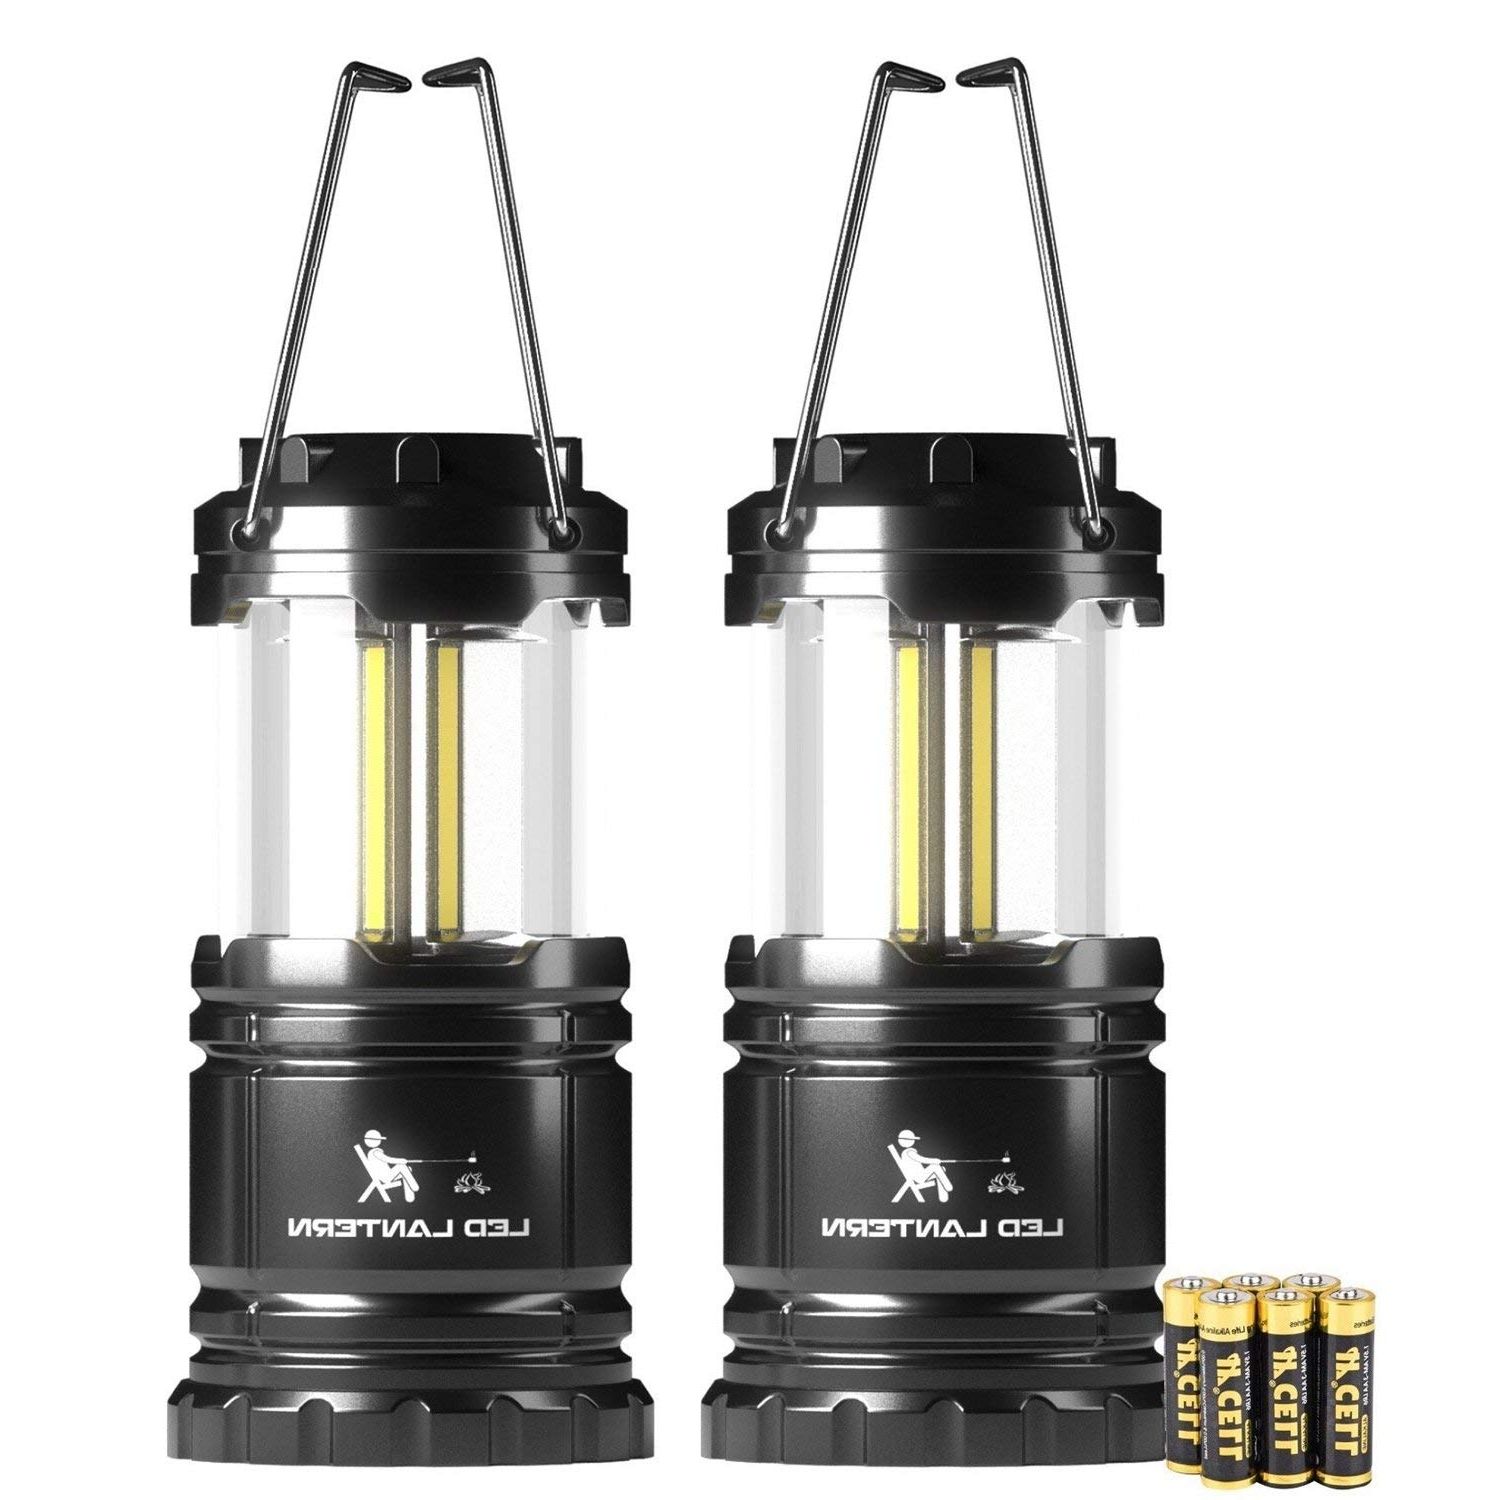 Outdoor Lanterns At Amazon Pertaining To Widely Used 350 Lumen Portable Outdoor Lights, Only $ (View 13 of 20)